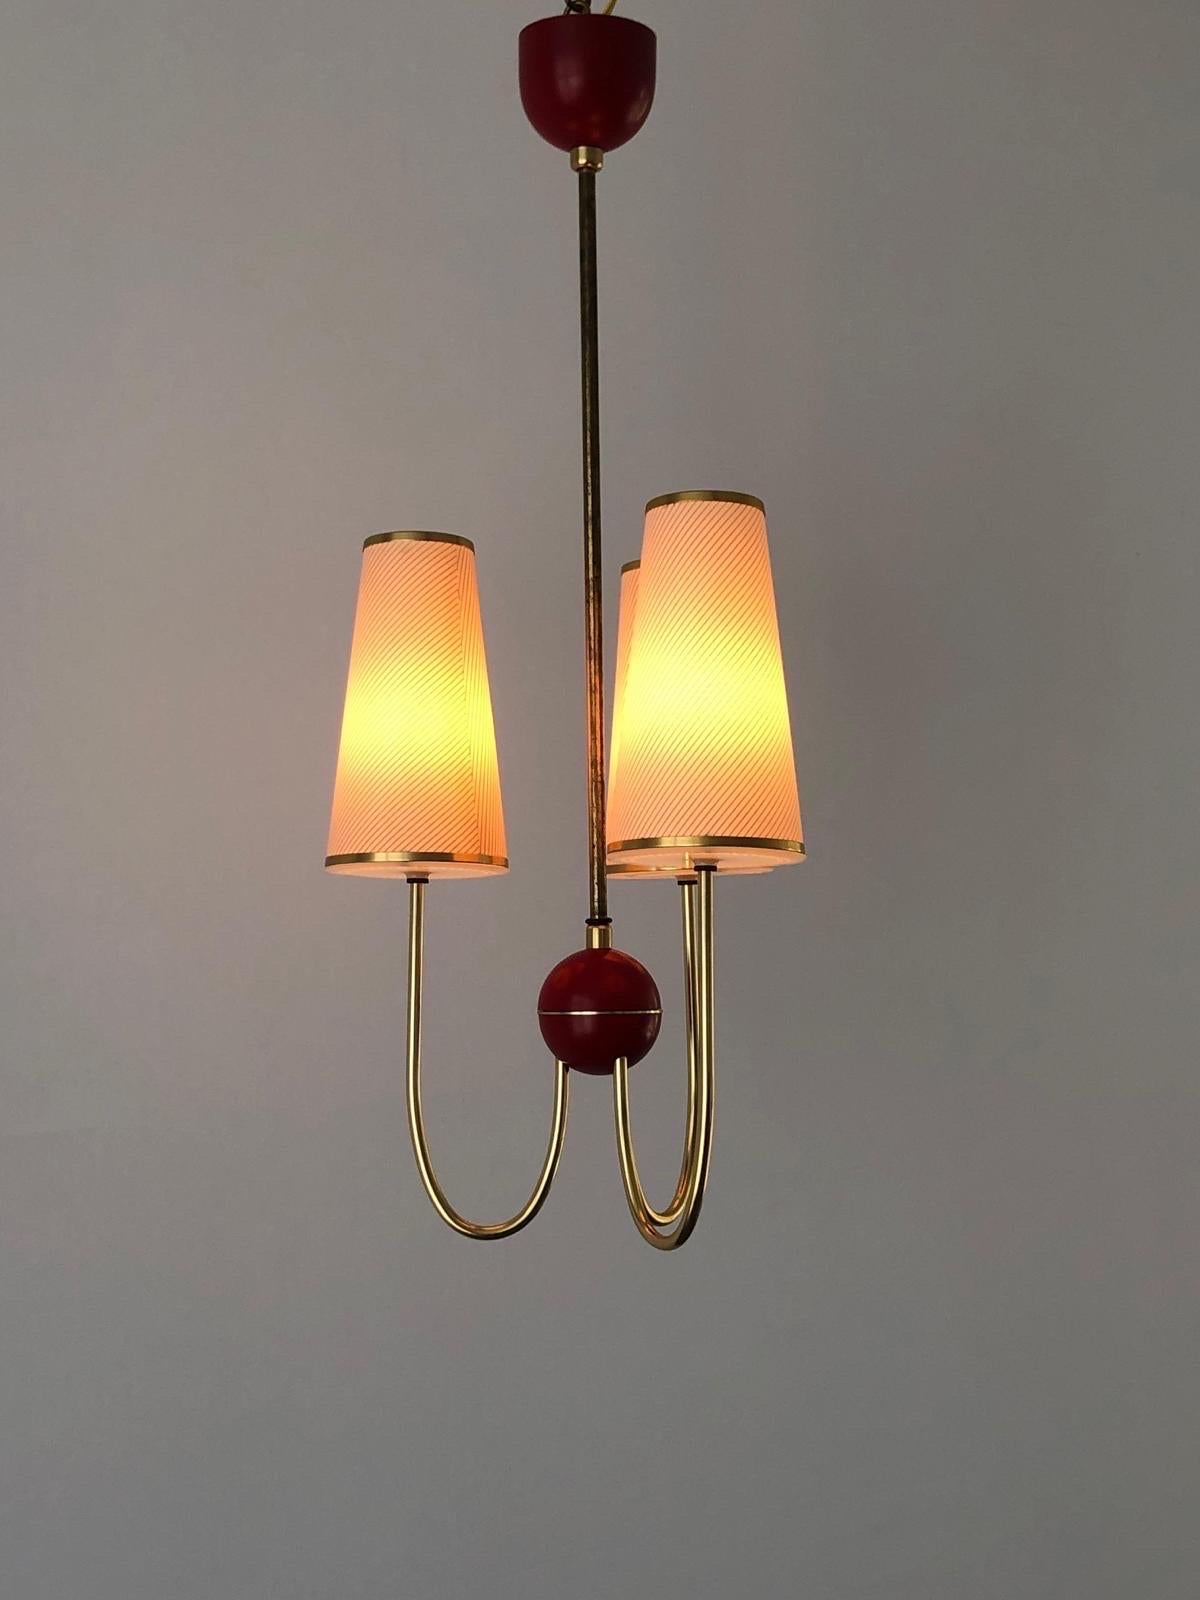 3-armed Fabric and Plastic Sputnik Pendant Lamp by Erco, 1950s, Germany For Sale 5